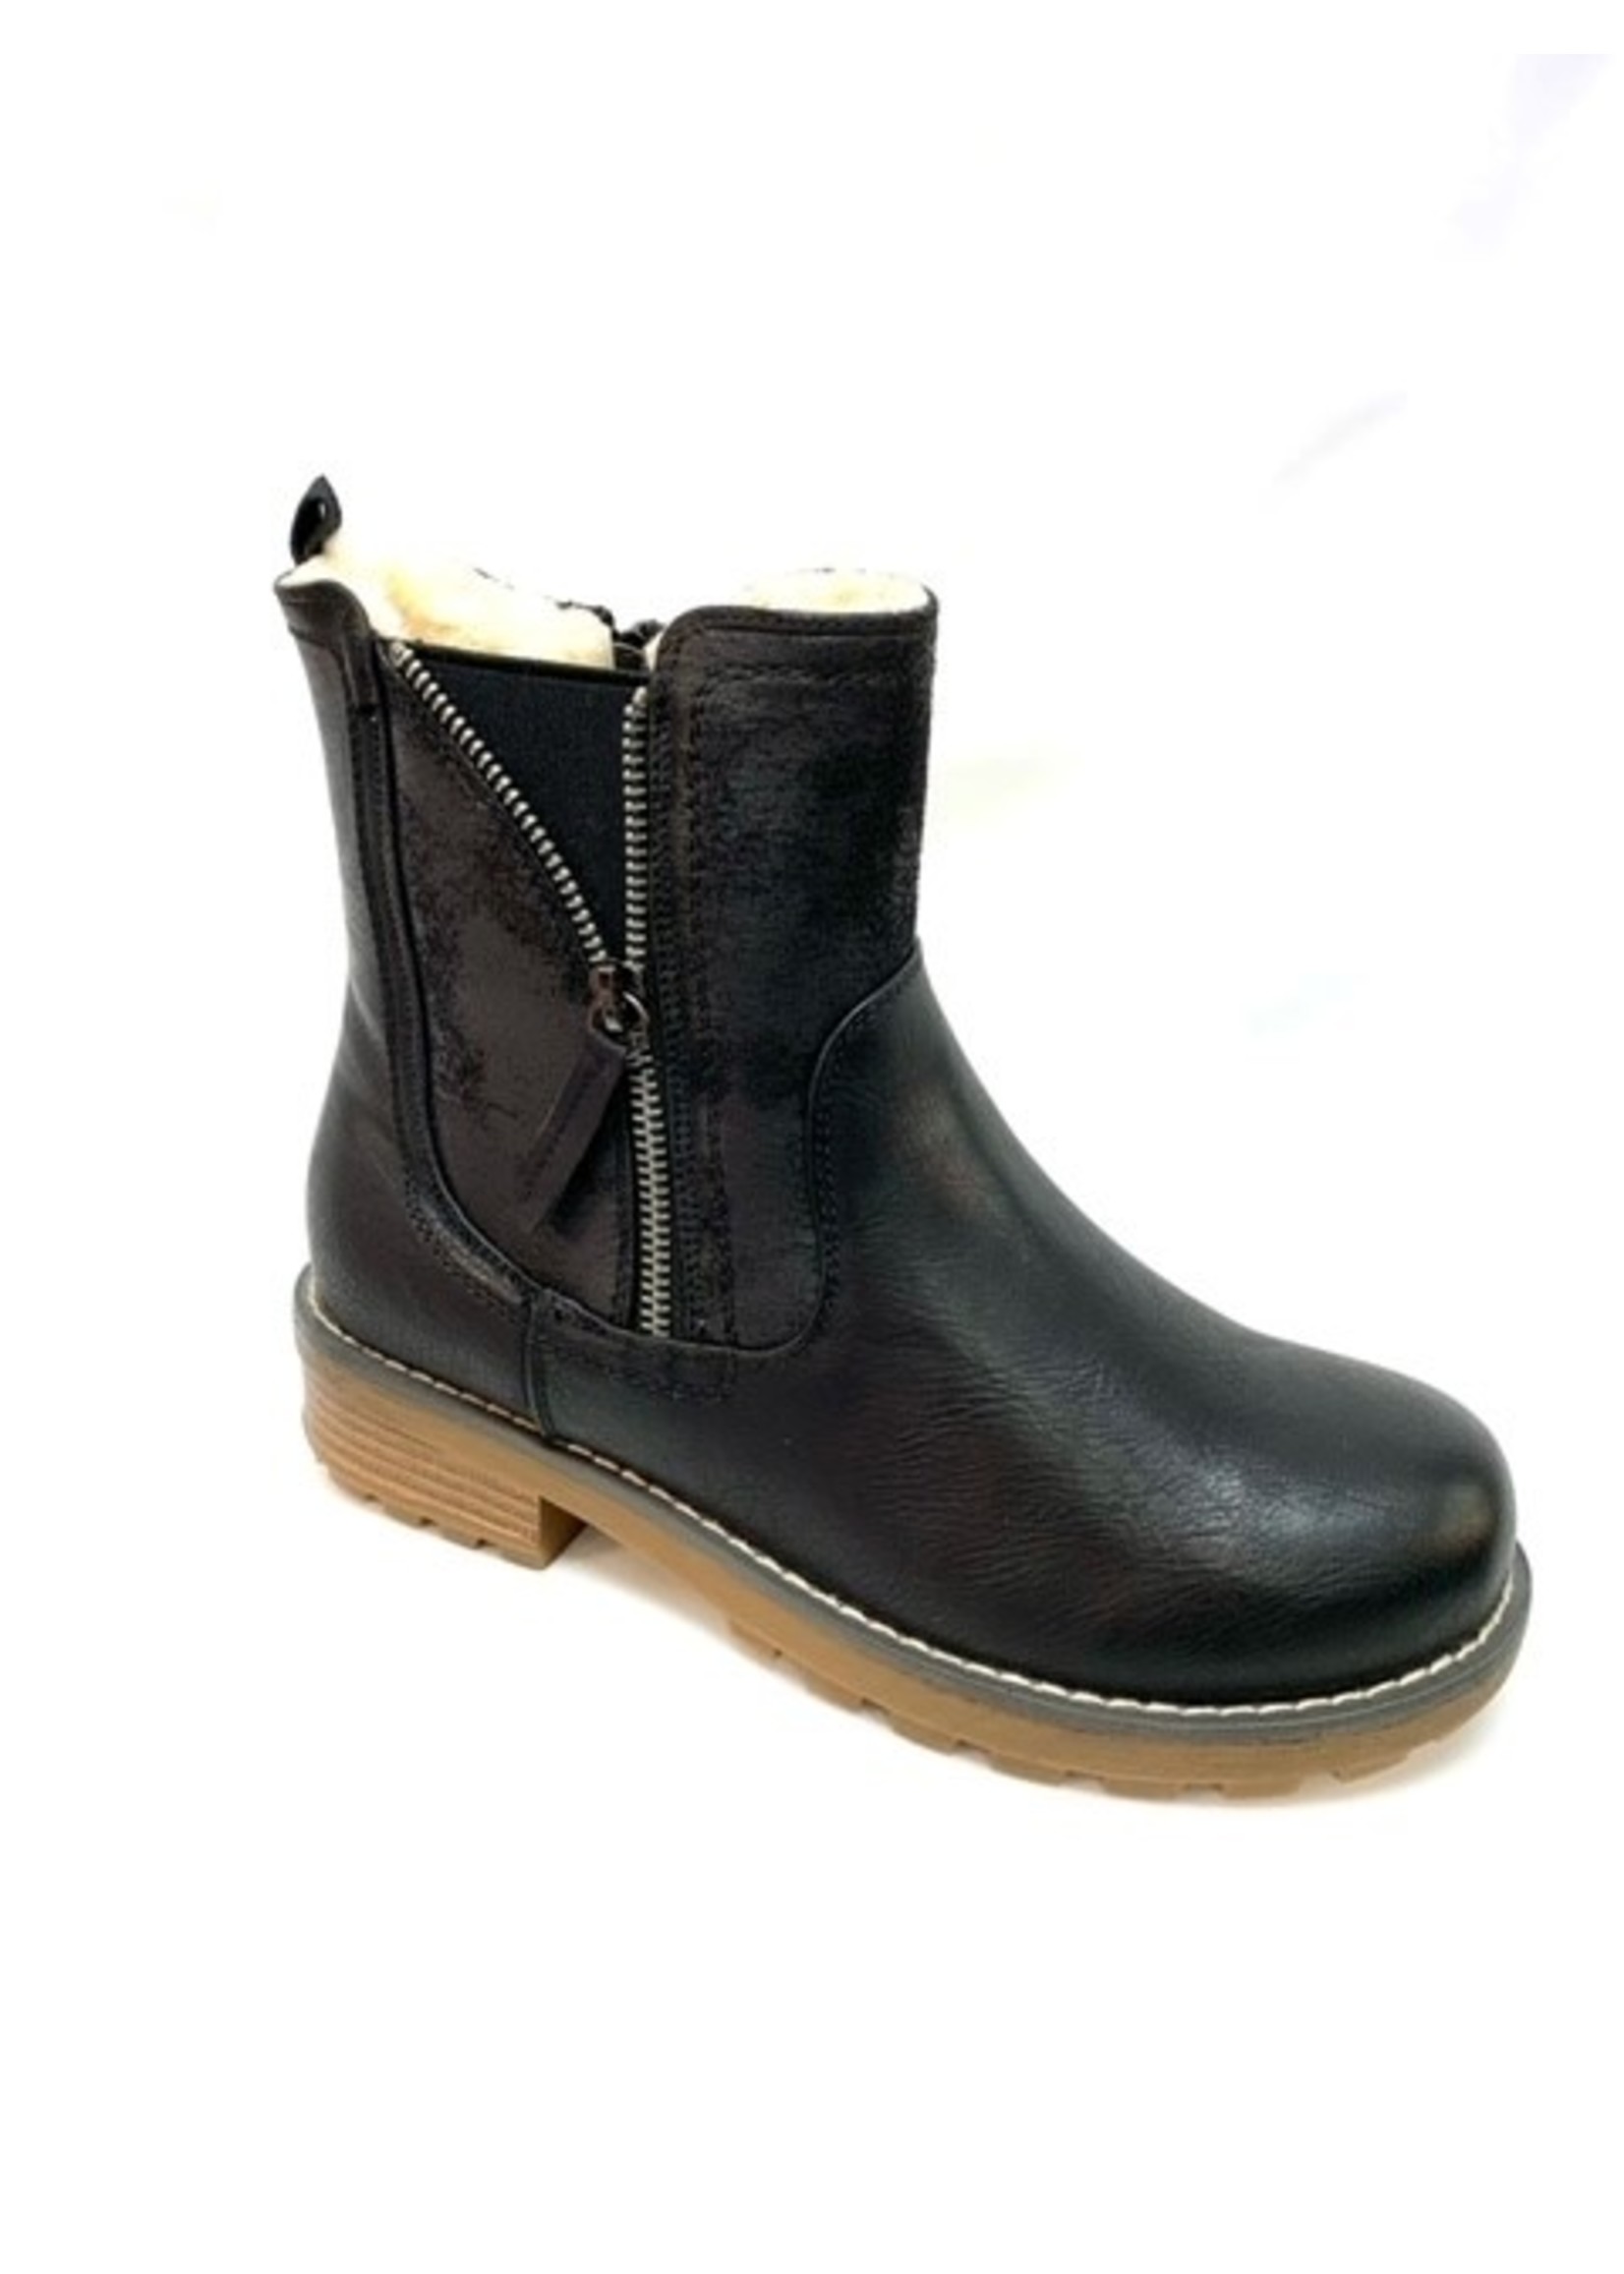 Frontier North short winter boot, three colors available